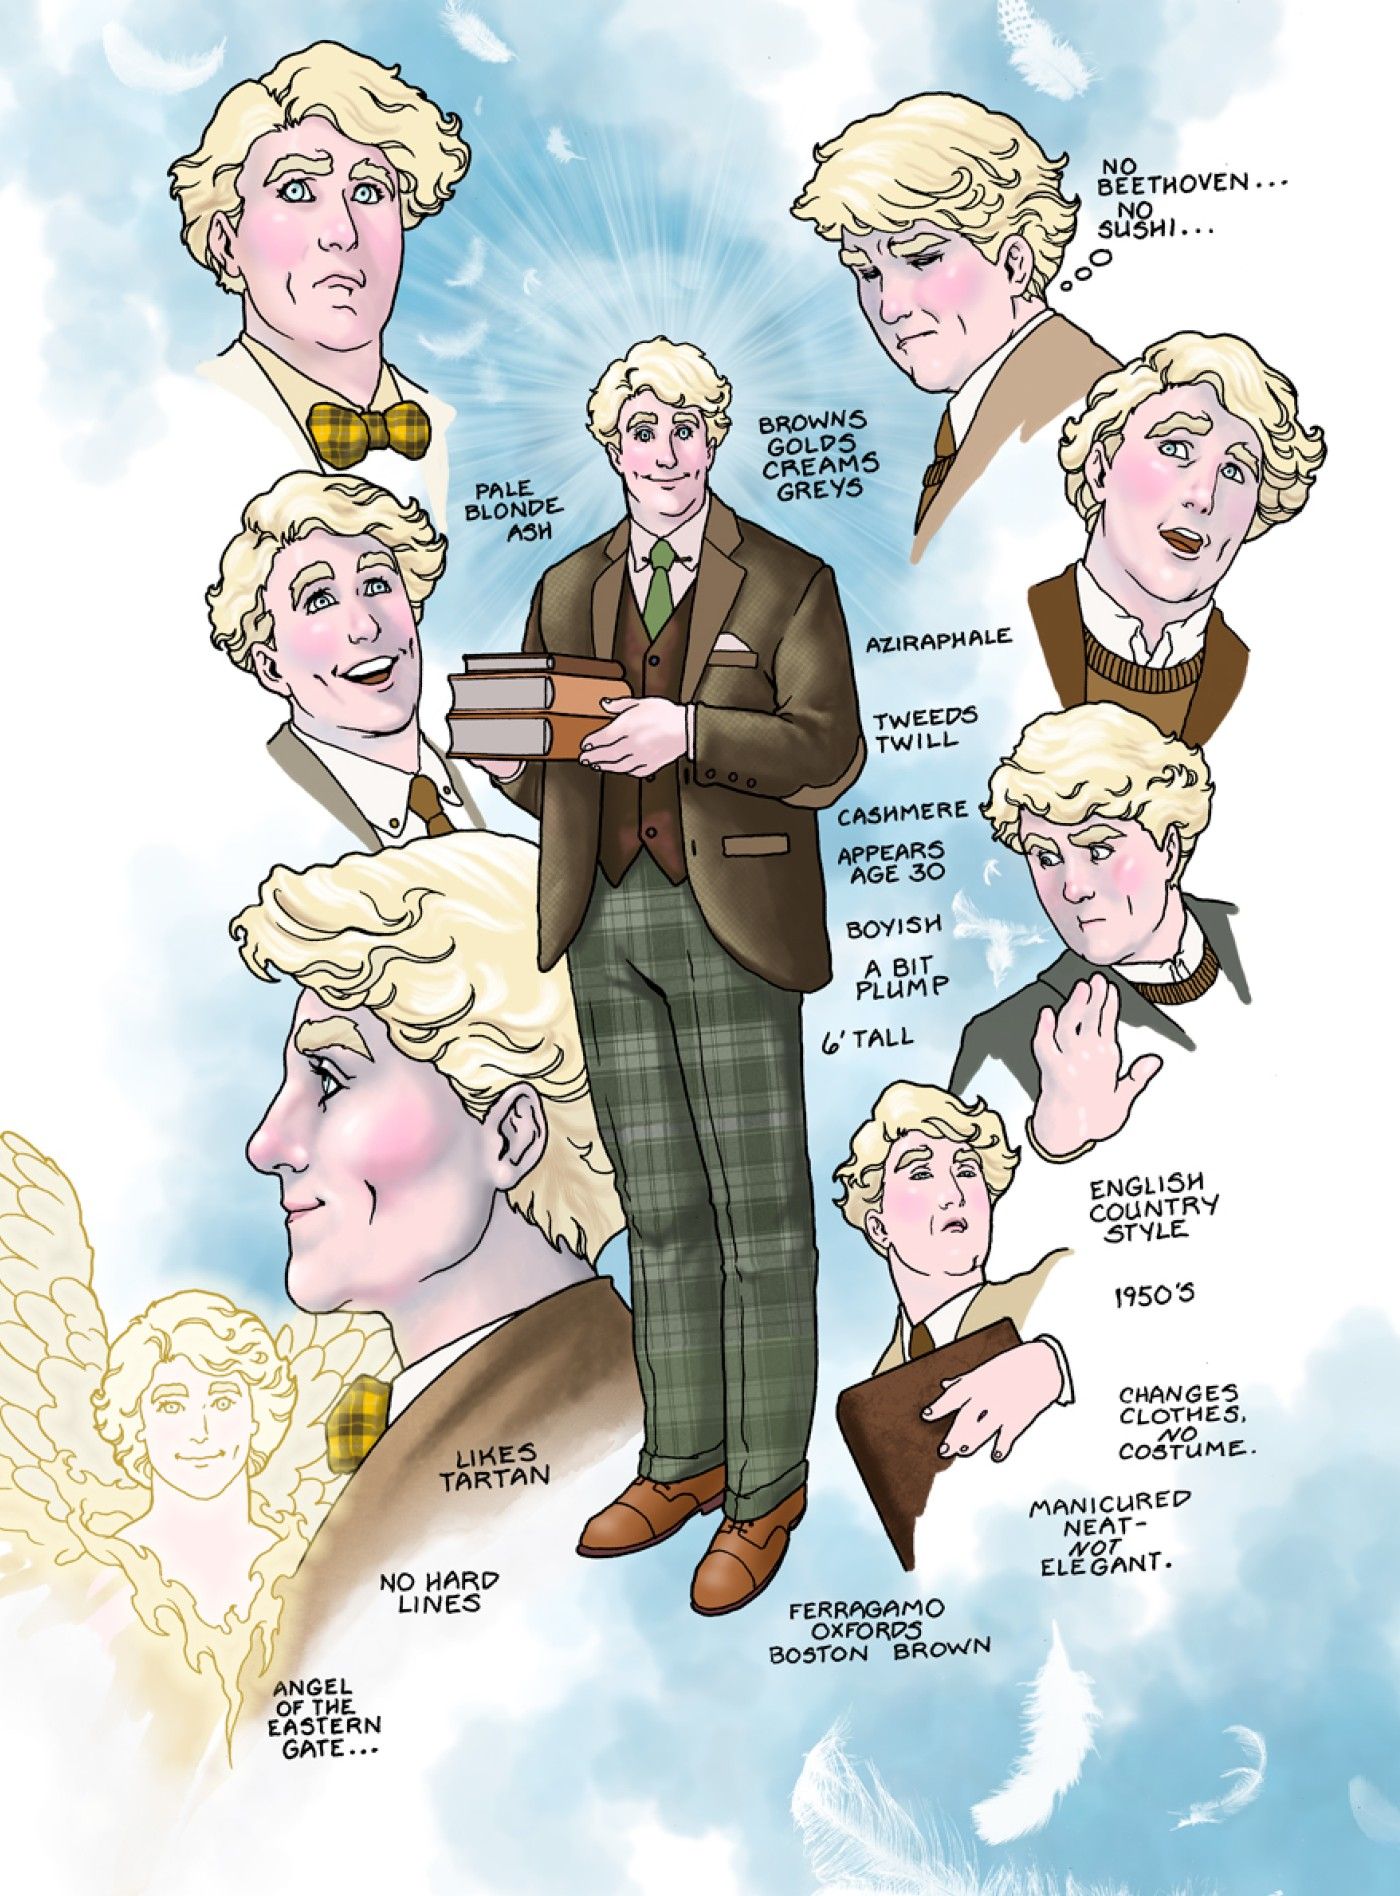 Crowley & Aziraphale Character Designs Revealed for New Record-Breaking Good Omens Adaptation